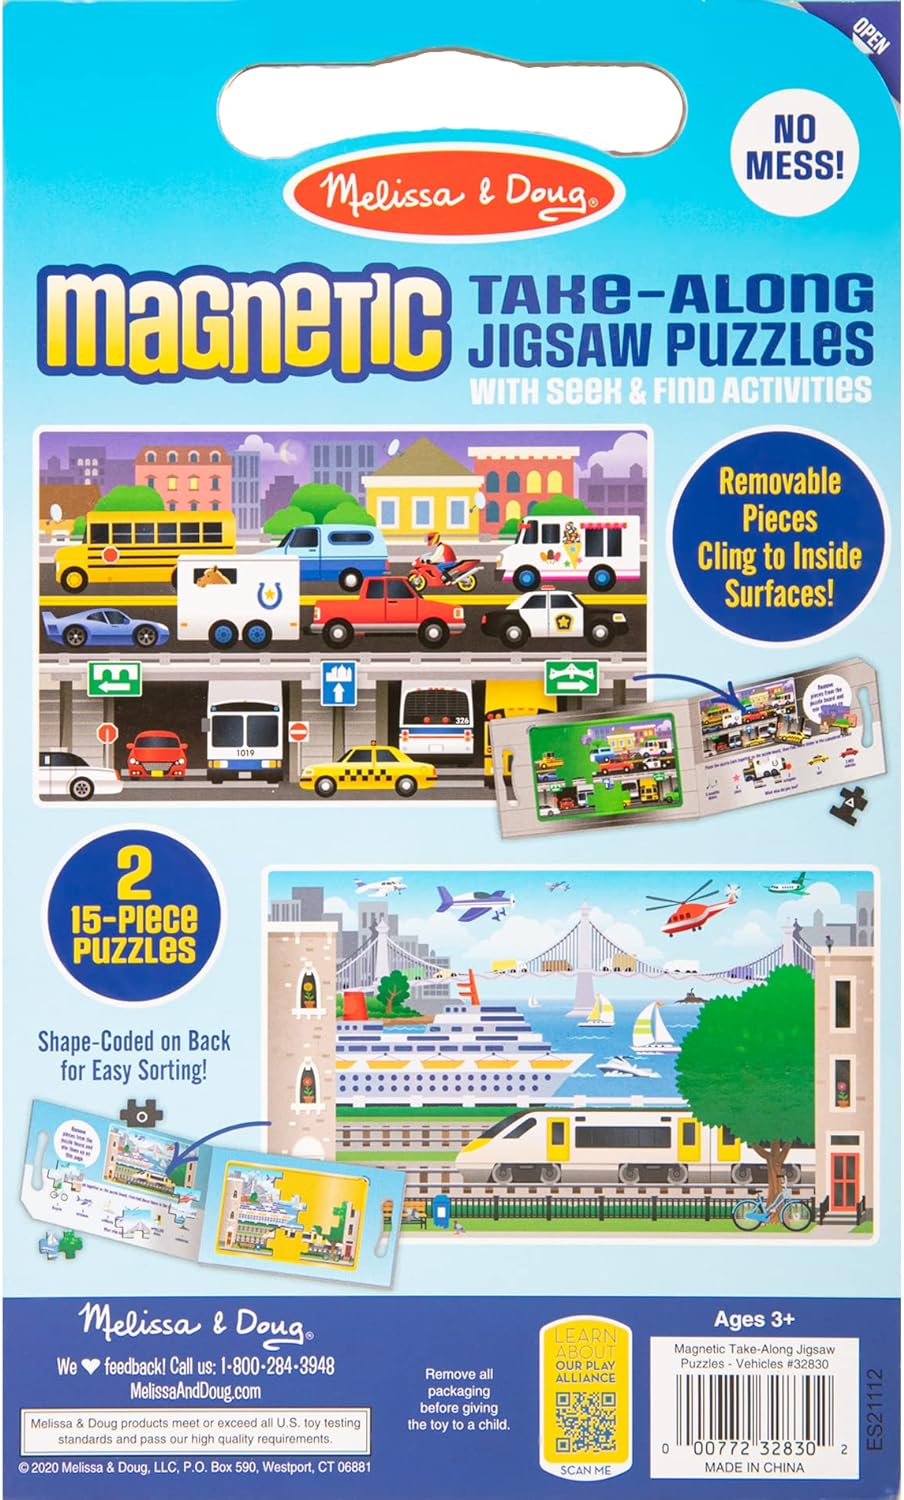 Take Along Magnetic Jigsaw Puzzle- Vehicles by Melissa & Doug #32830